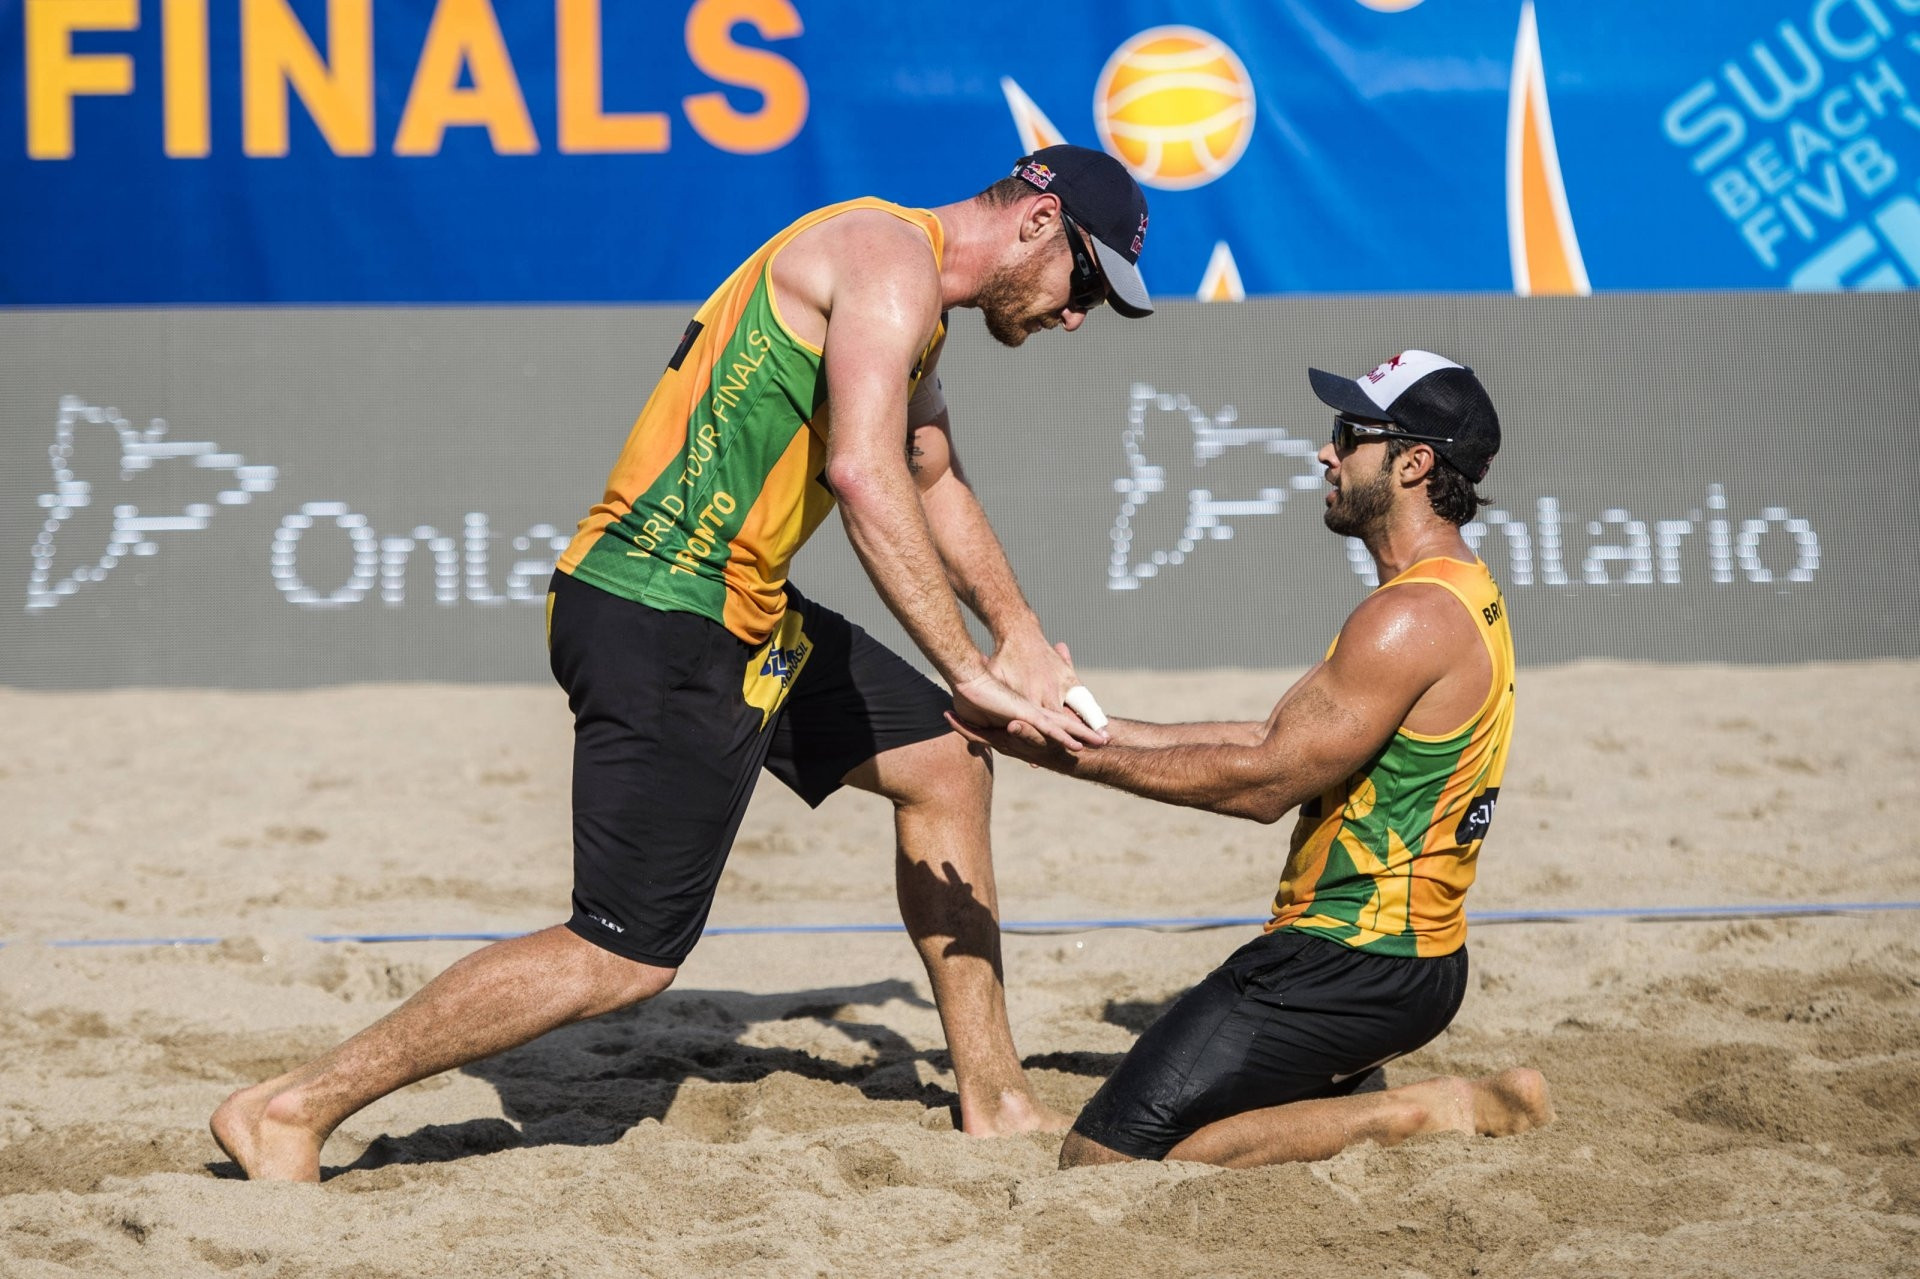 Reigning Olympic beach volleyball champions announce shock split